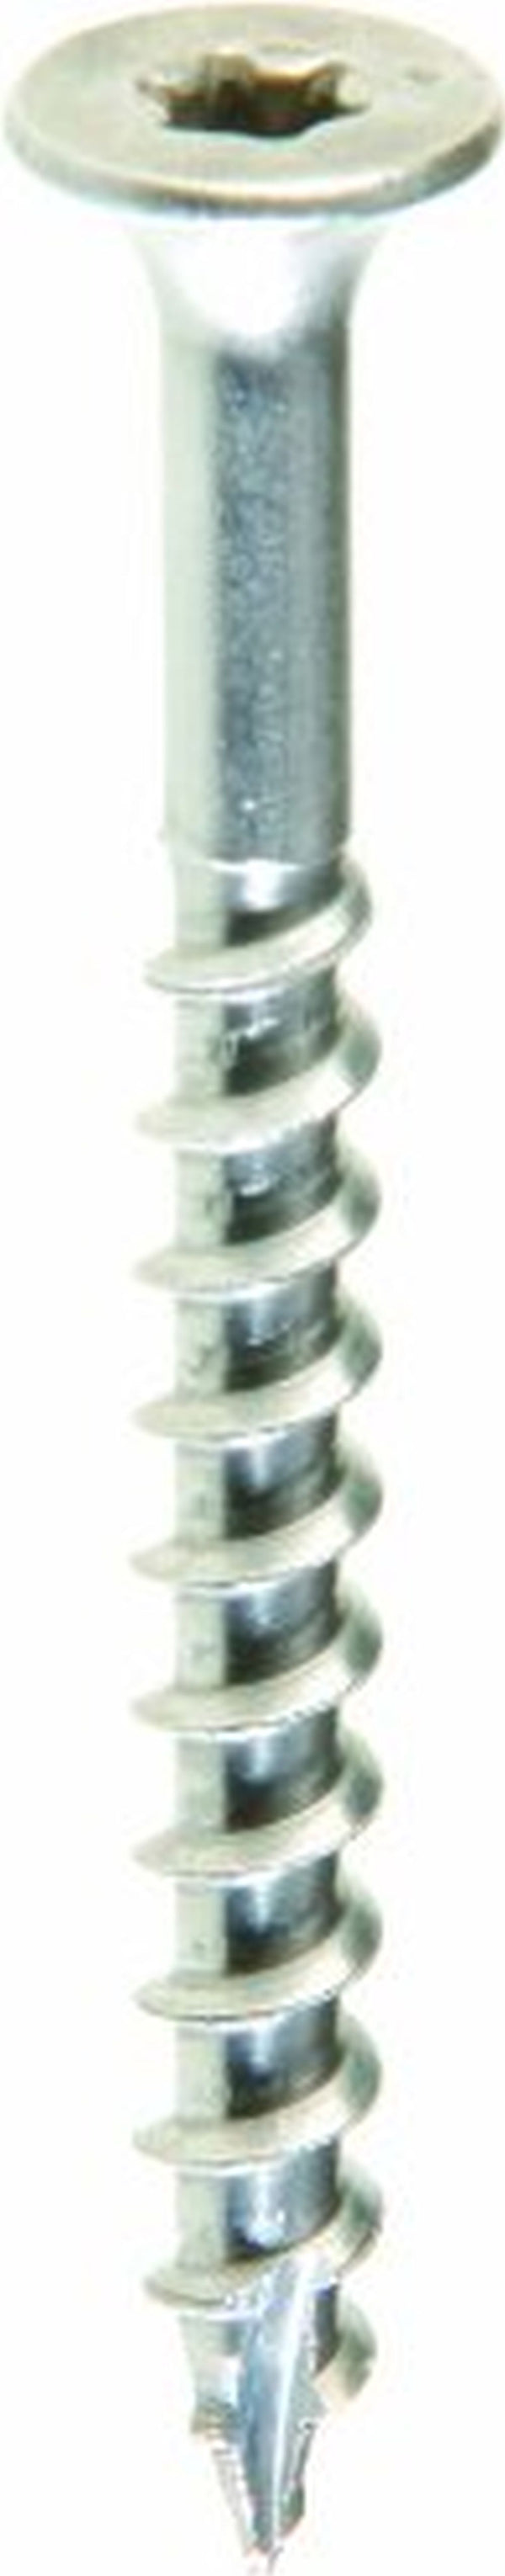 Grip Rite MAXS1588DS3055 #8 x 1-5/8 in. 305 Stainless Steel Deck Screw (5lb -Pack)